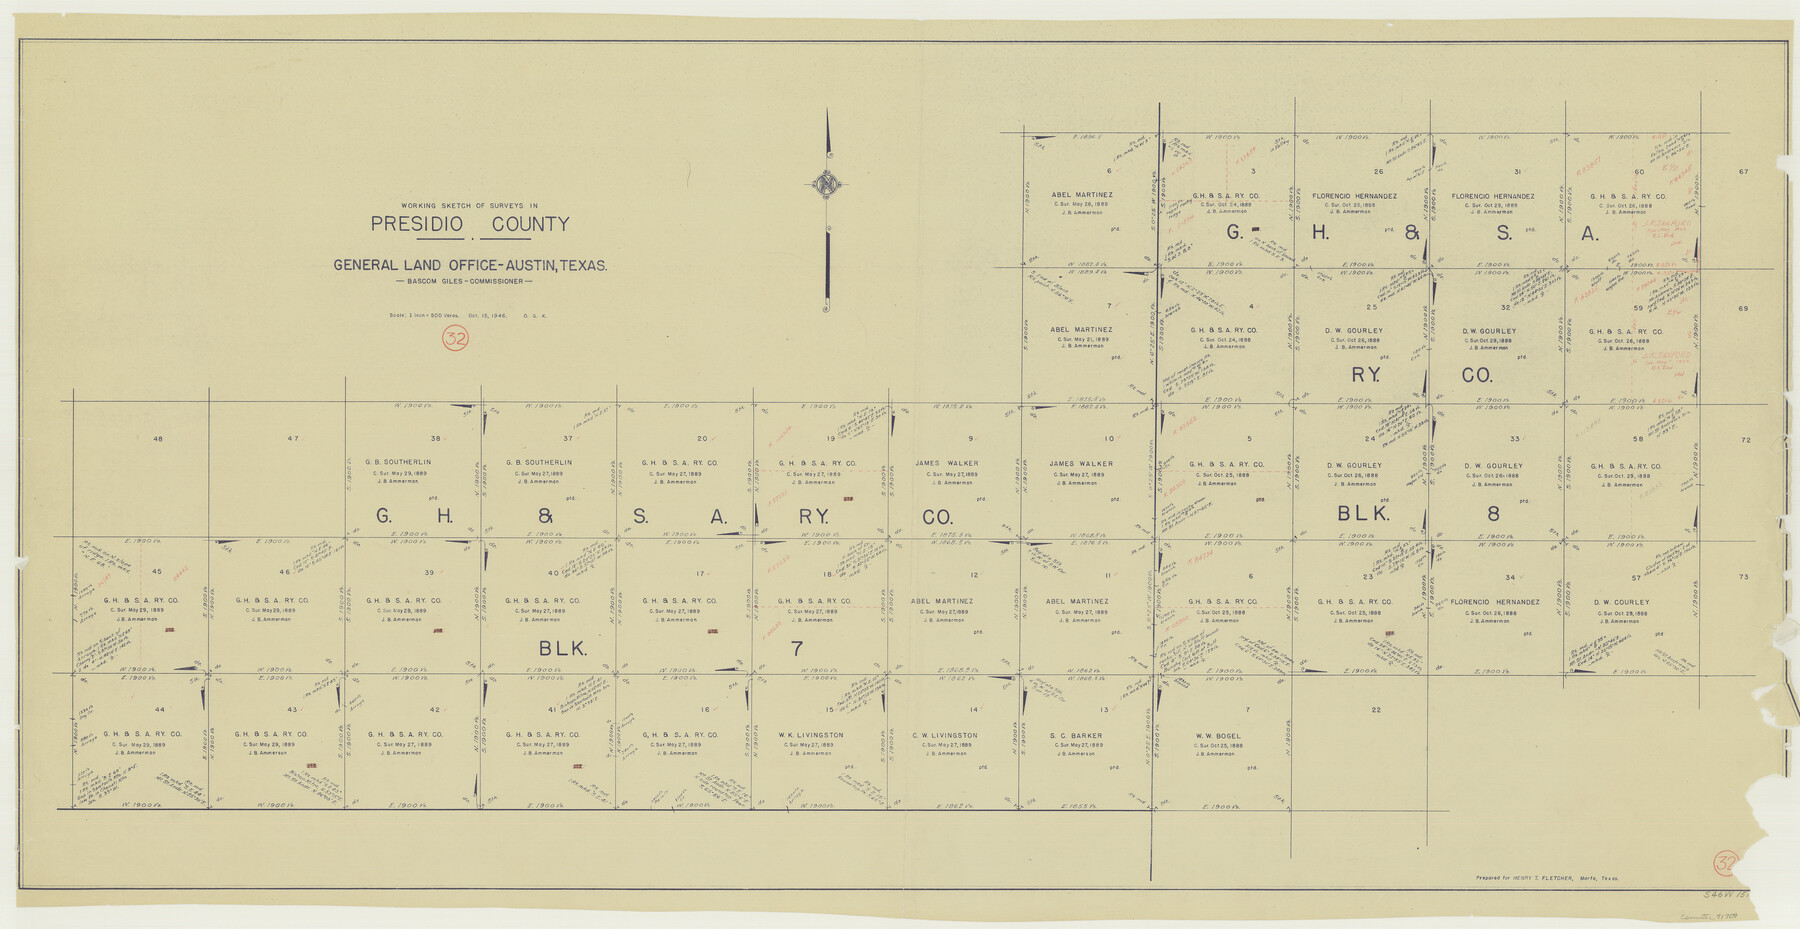 71709, Presidio County Working Sketch 32, General Map Collection